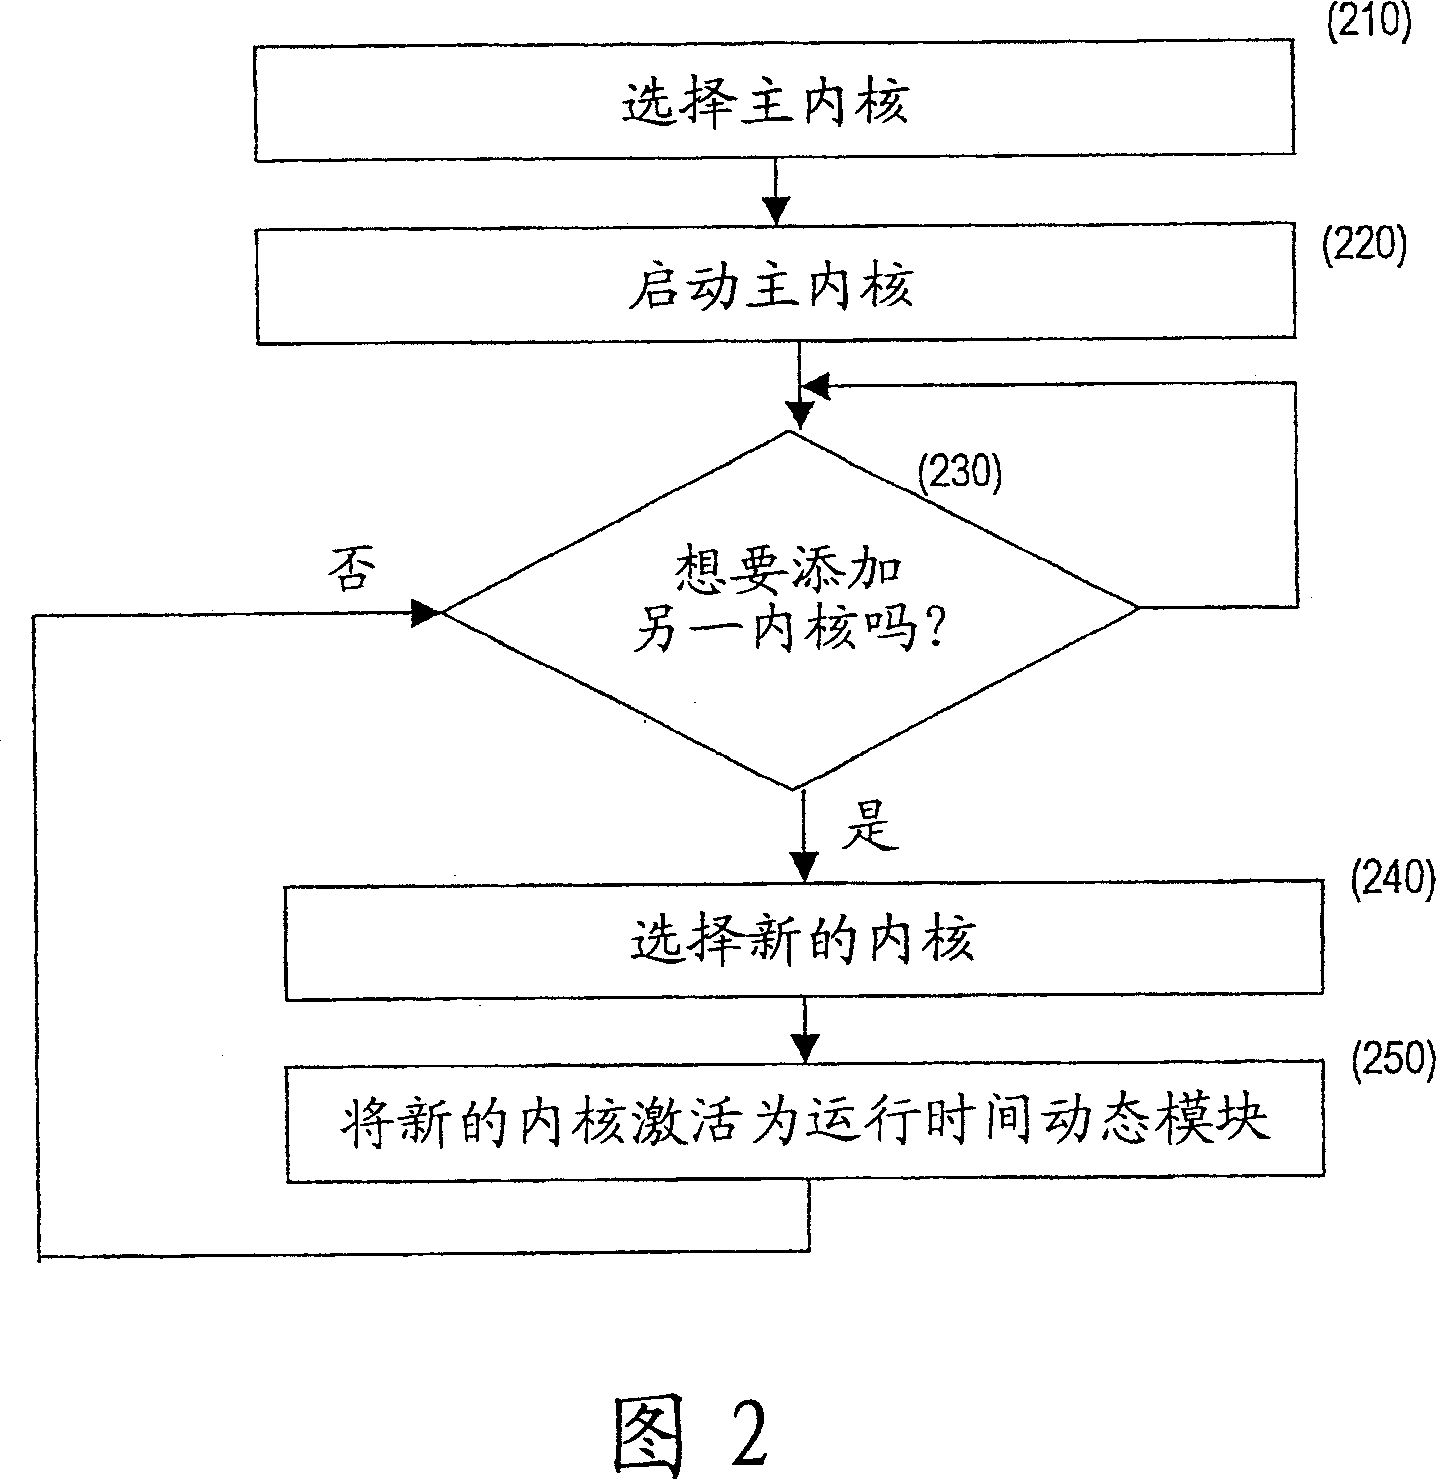 Method and system for concurrent excution of mutiple kernels